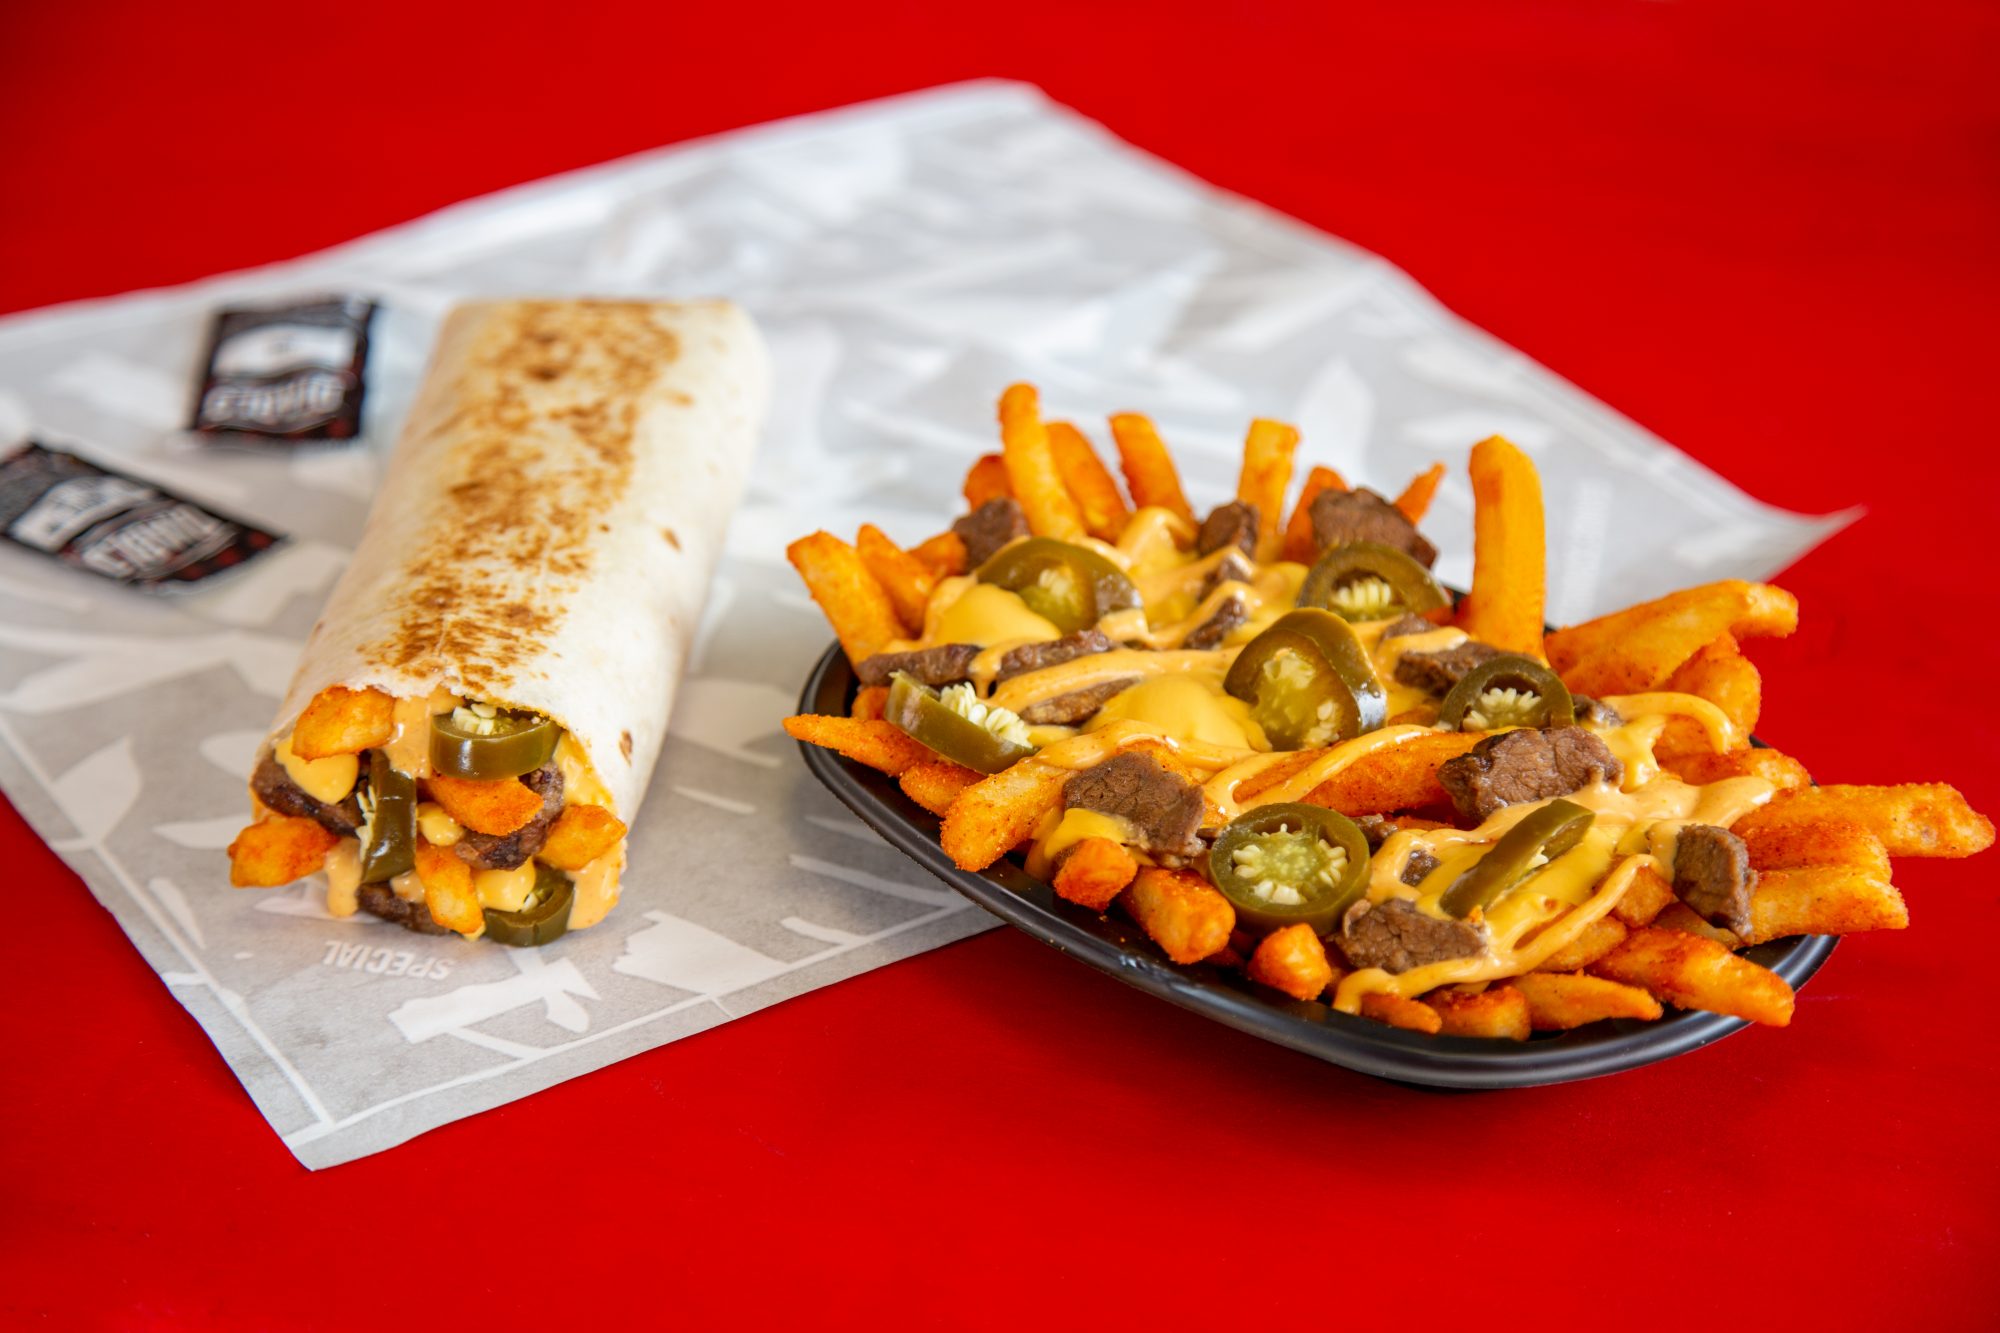 Taco Bell's New Steak Rattlesnake Fries Look Deliciously Spicy